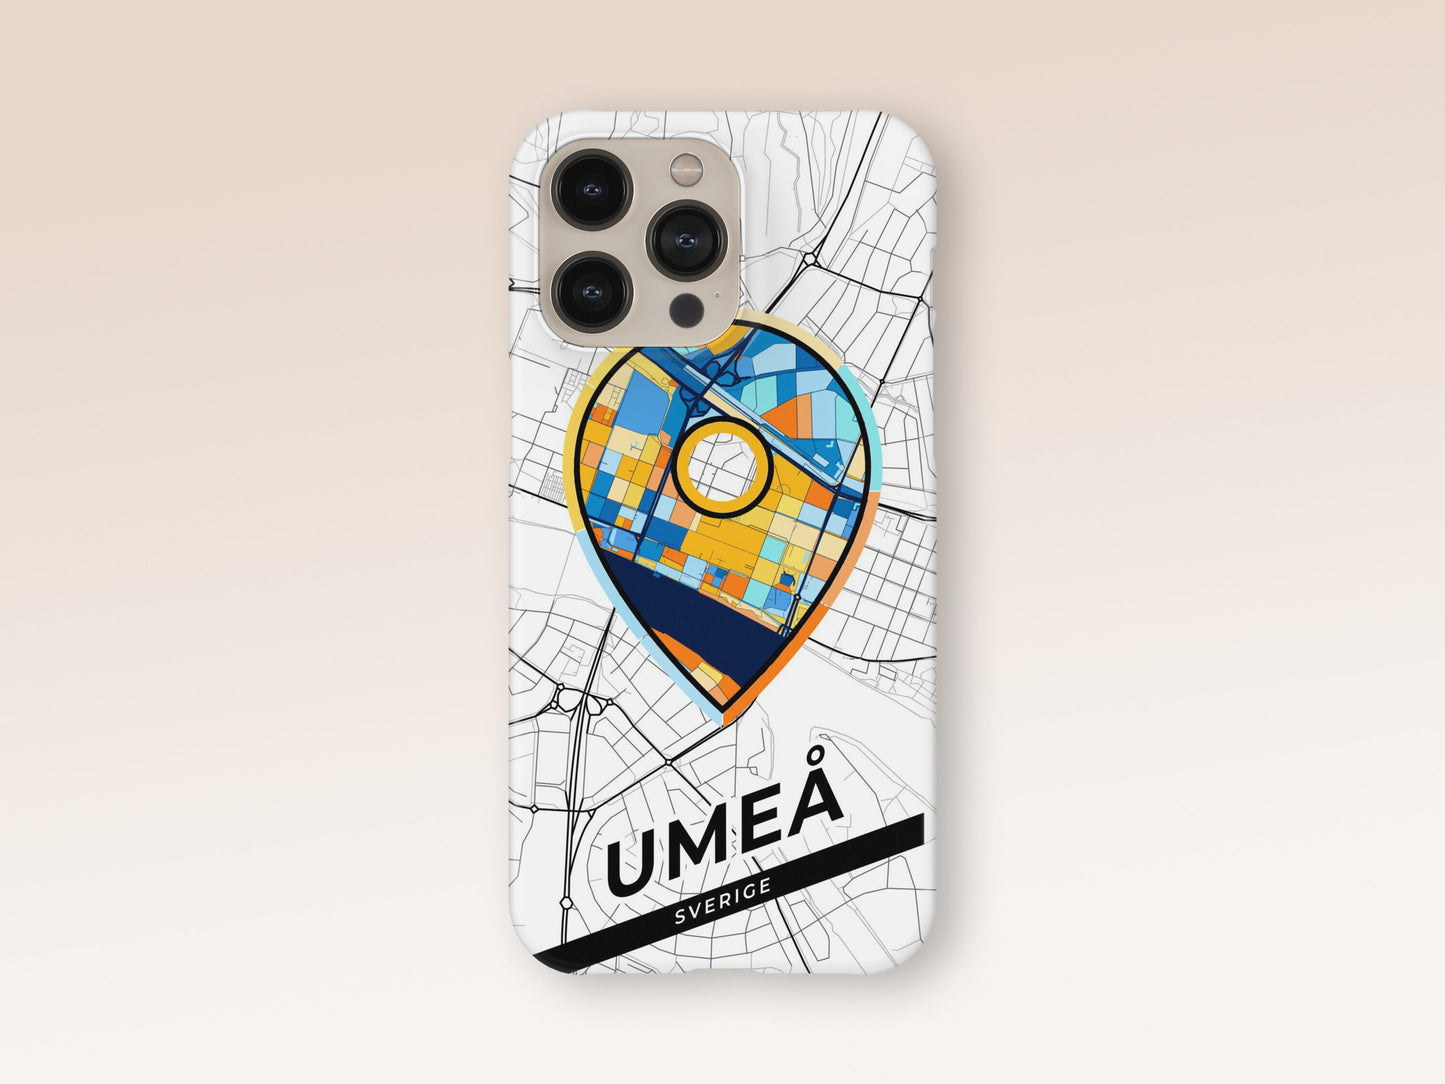 Umeå Sweden slim phone case with colorful icon 1